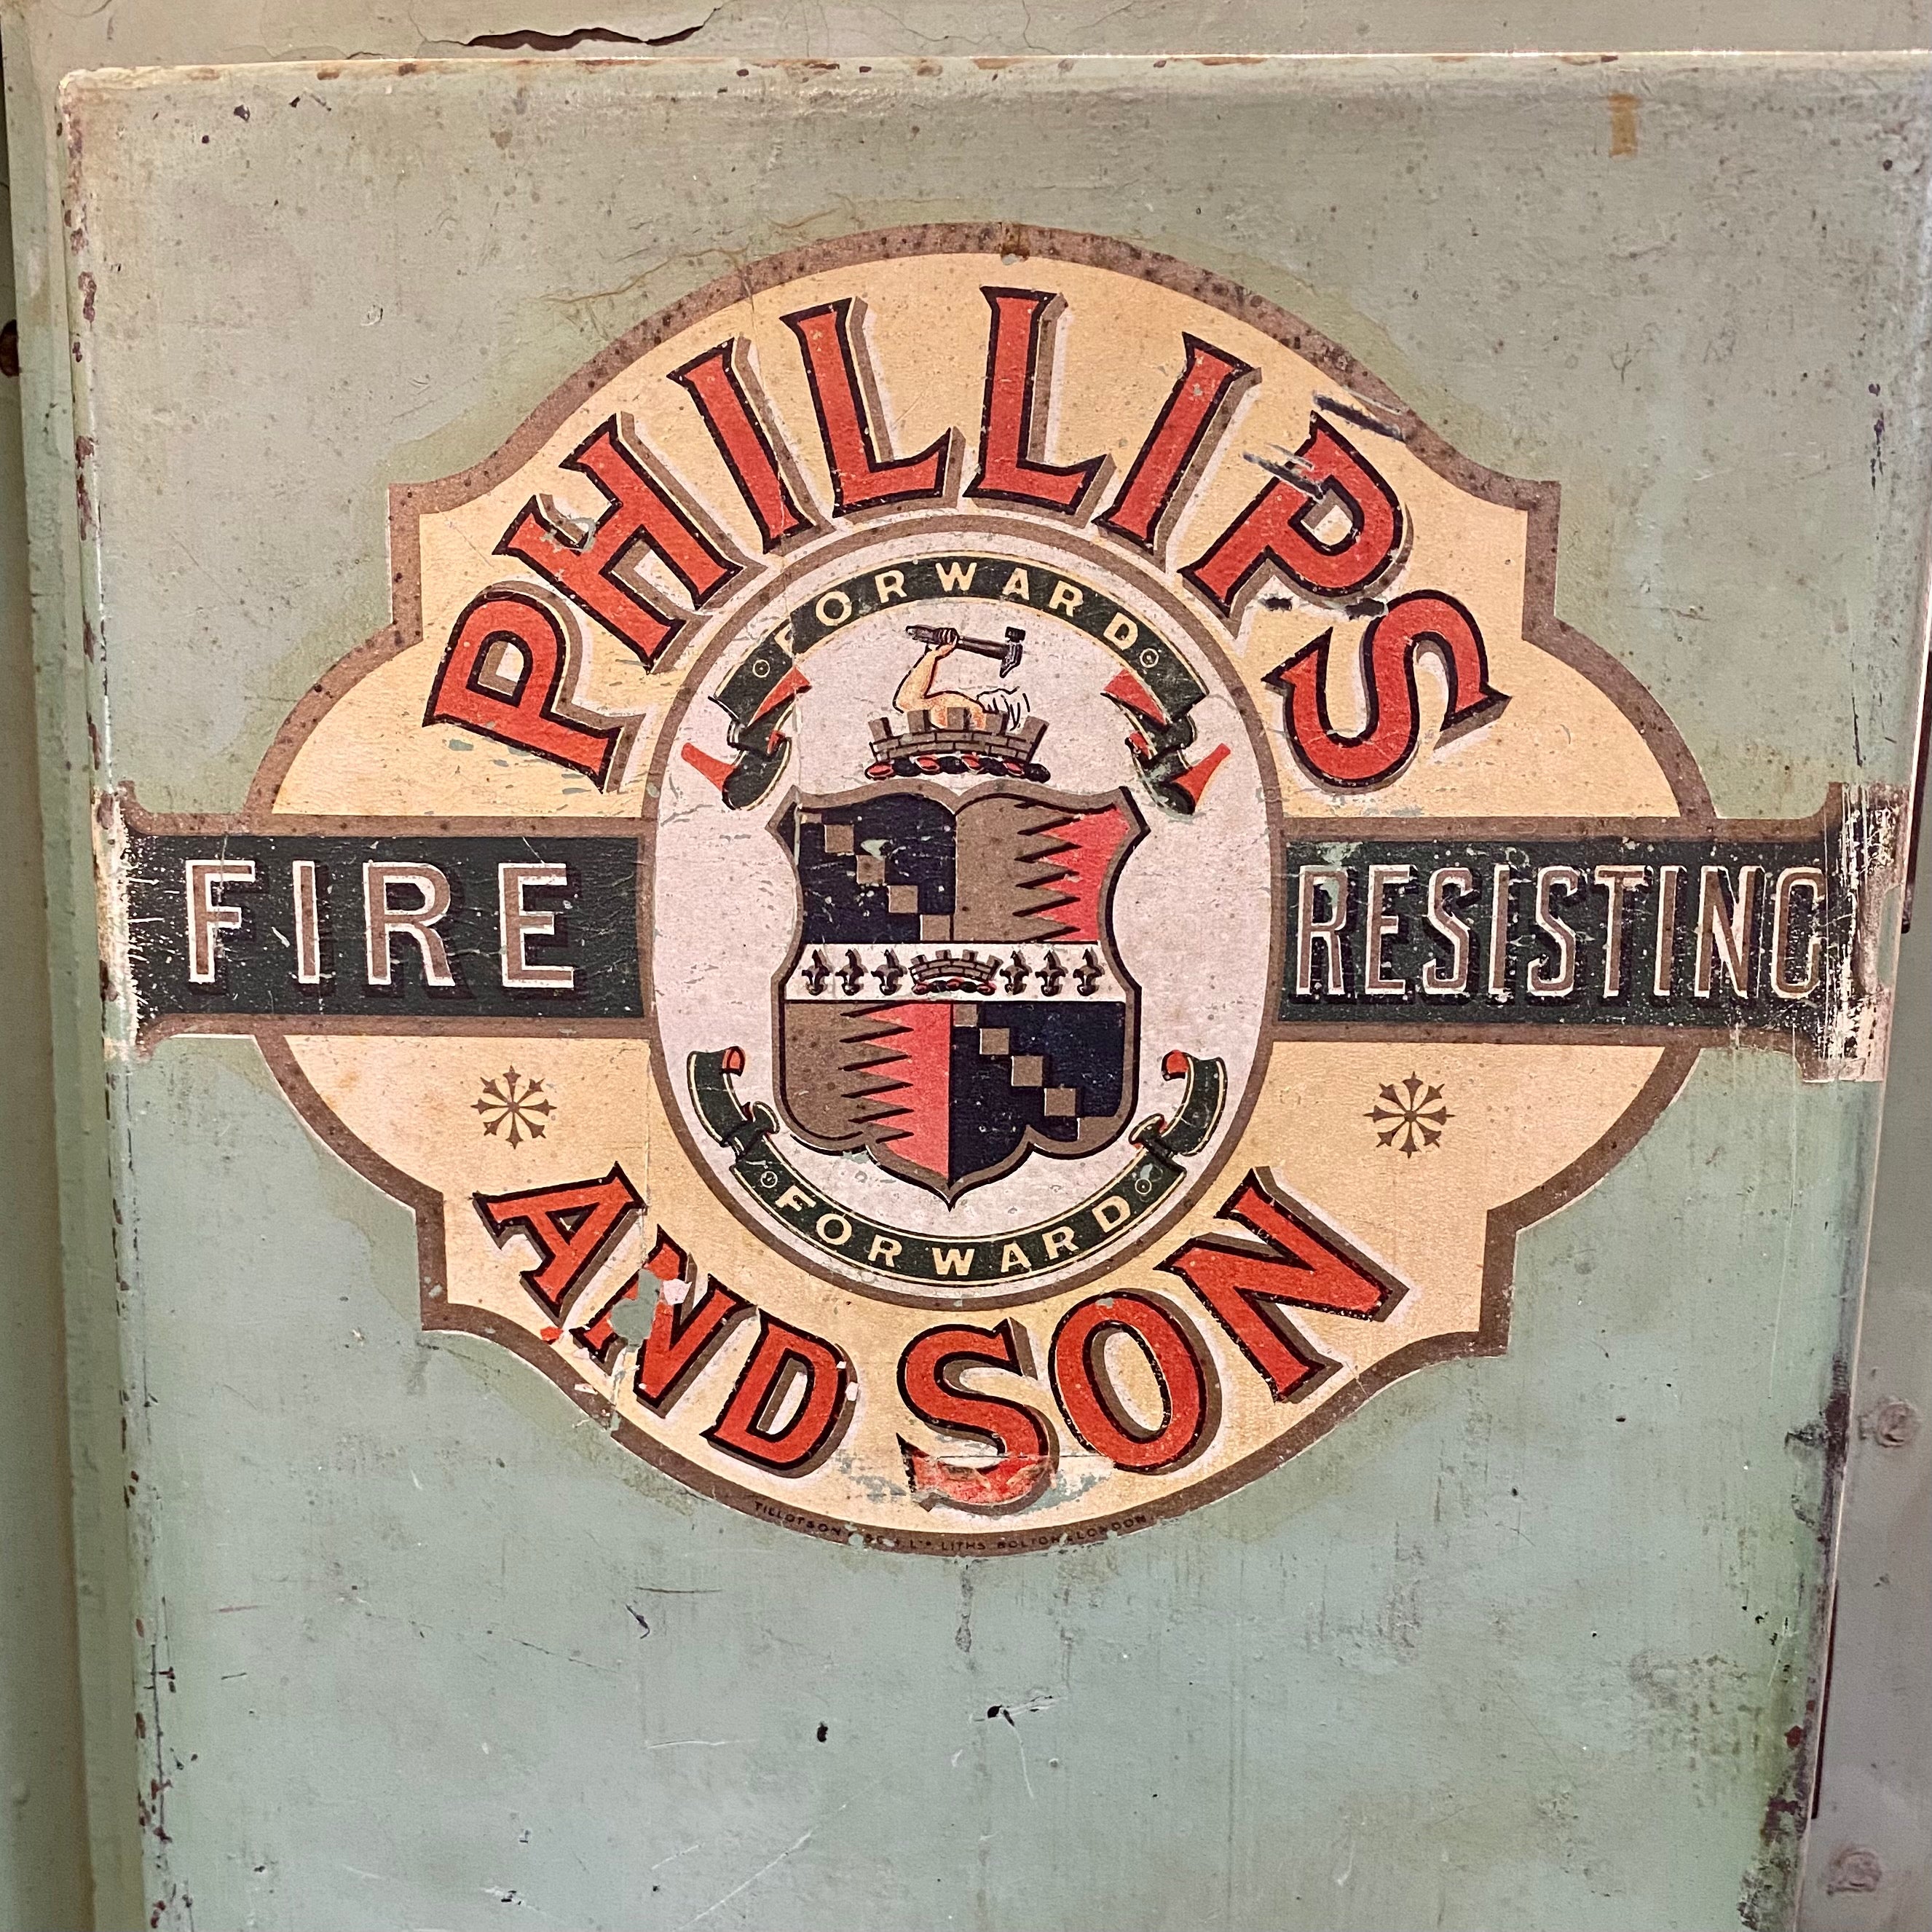 Antique Phillips and Son Safe